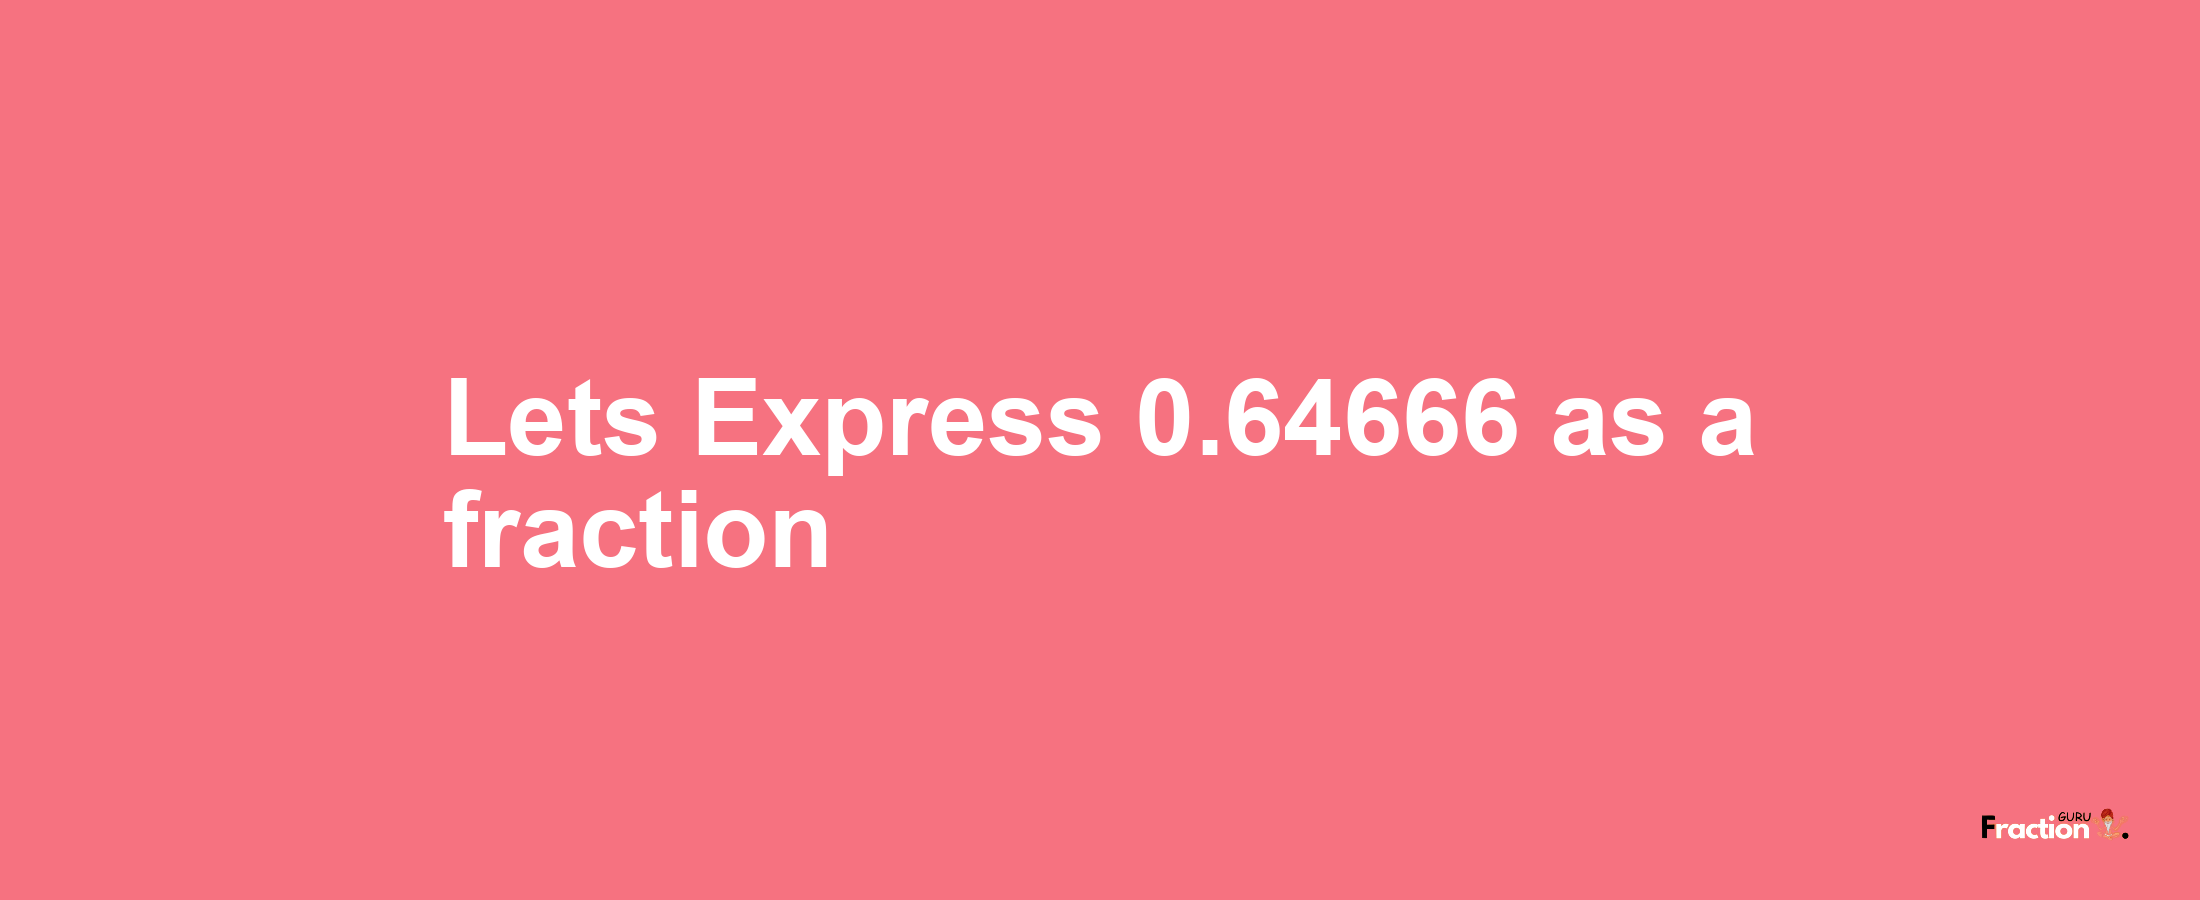 Lets Express 0.64666 as afraction